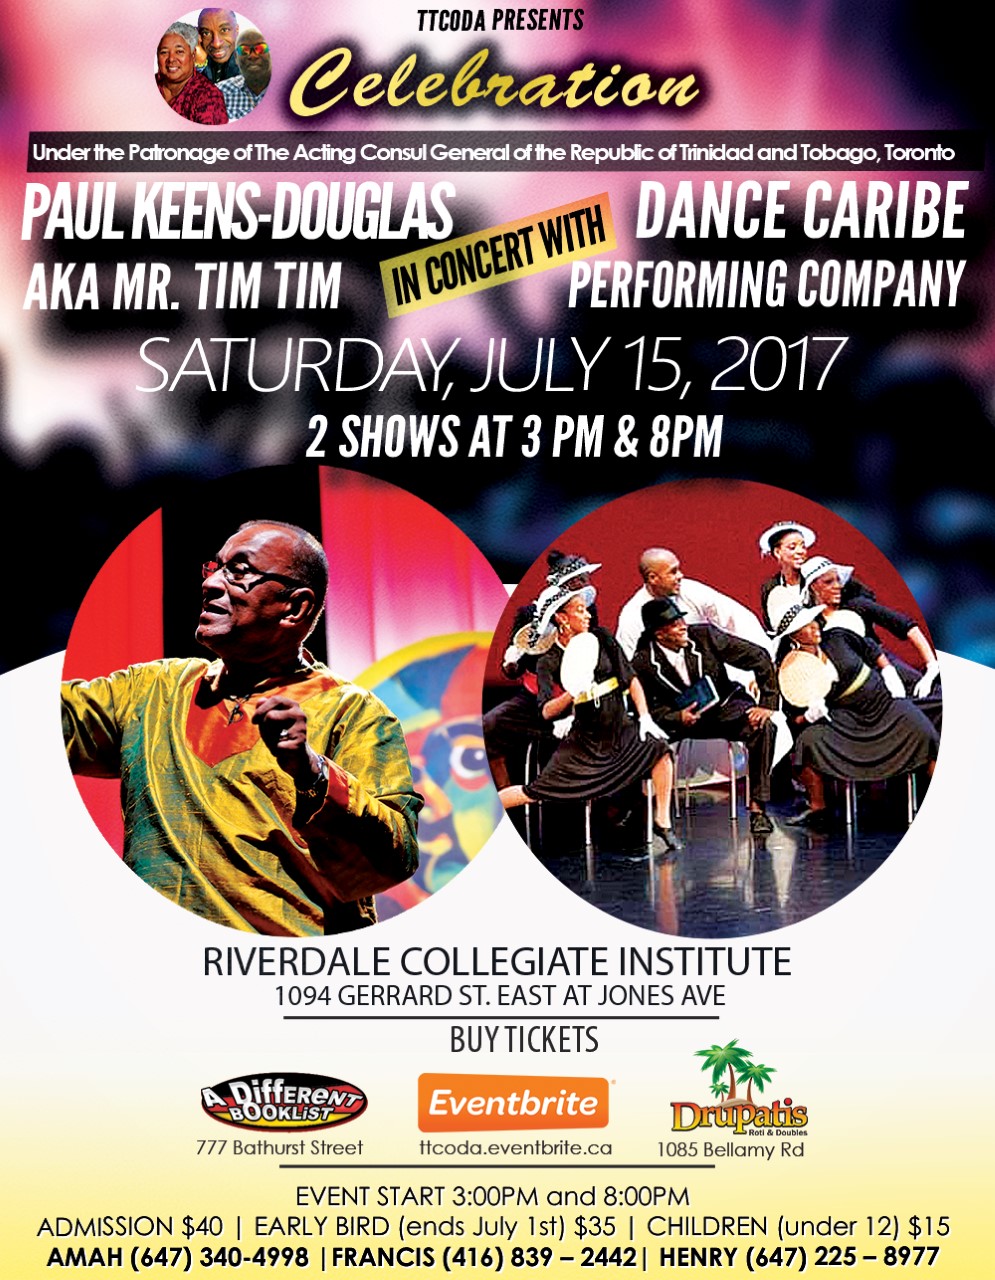 Paul Keens-Douglas Brings Mr. Tim Tim and Characters to Toronto for a One Day Concert with Dance Caribe Performing Company